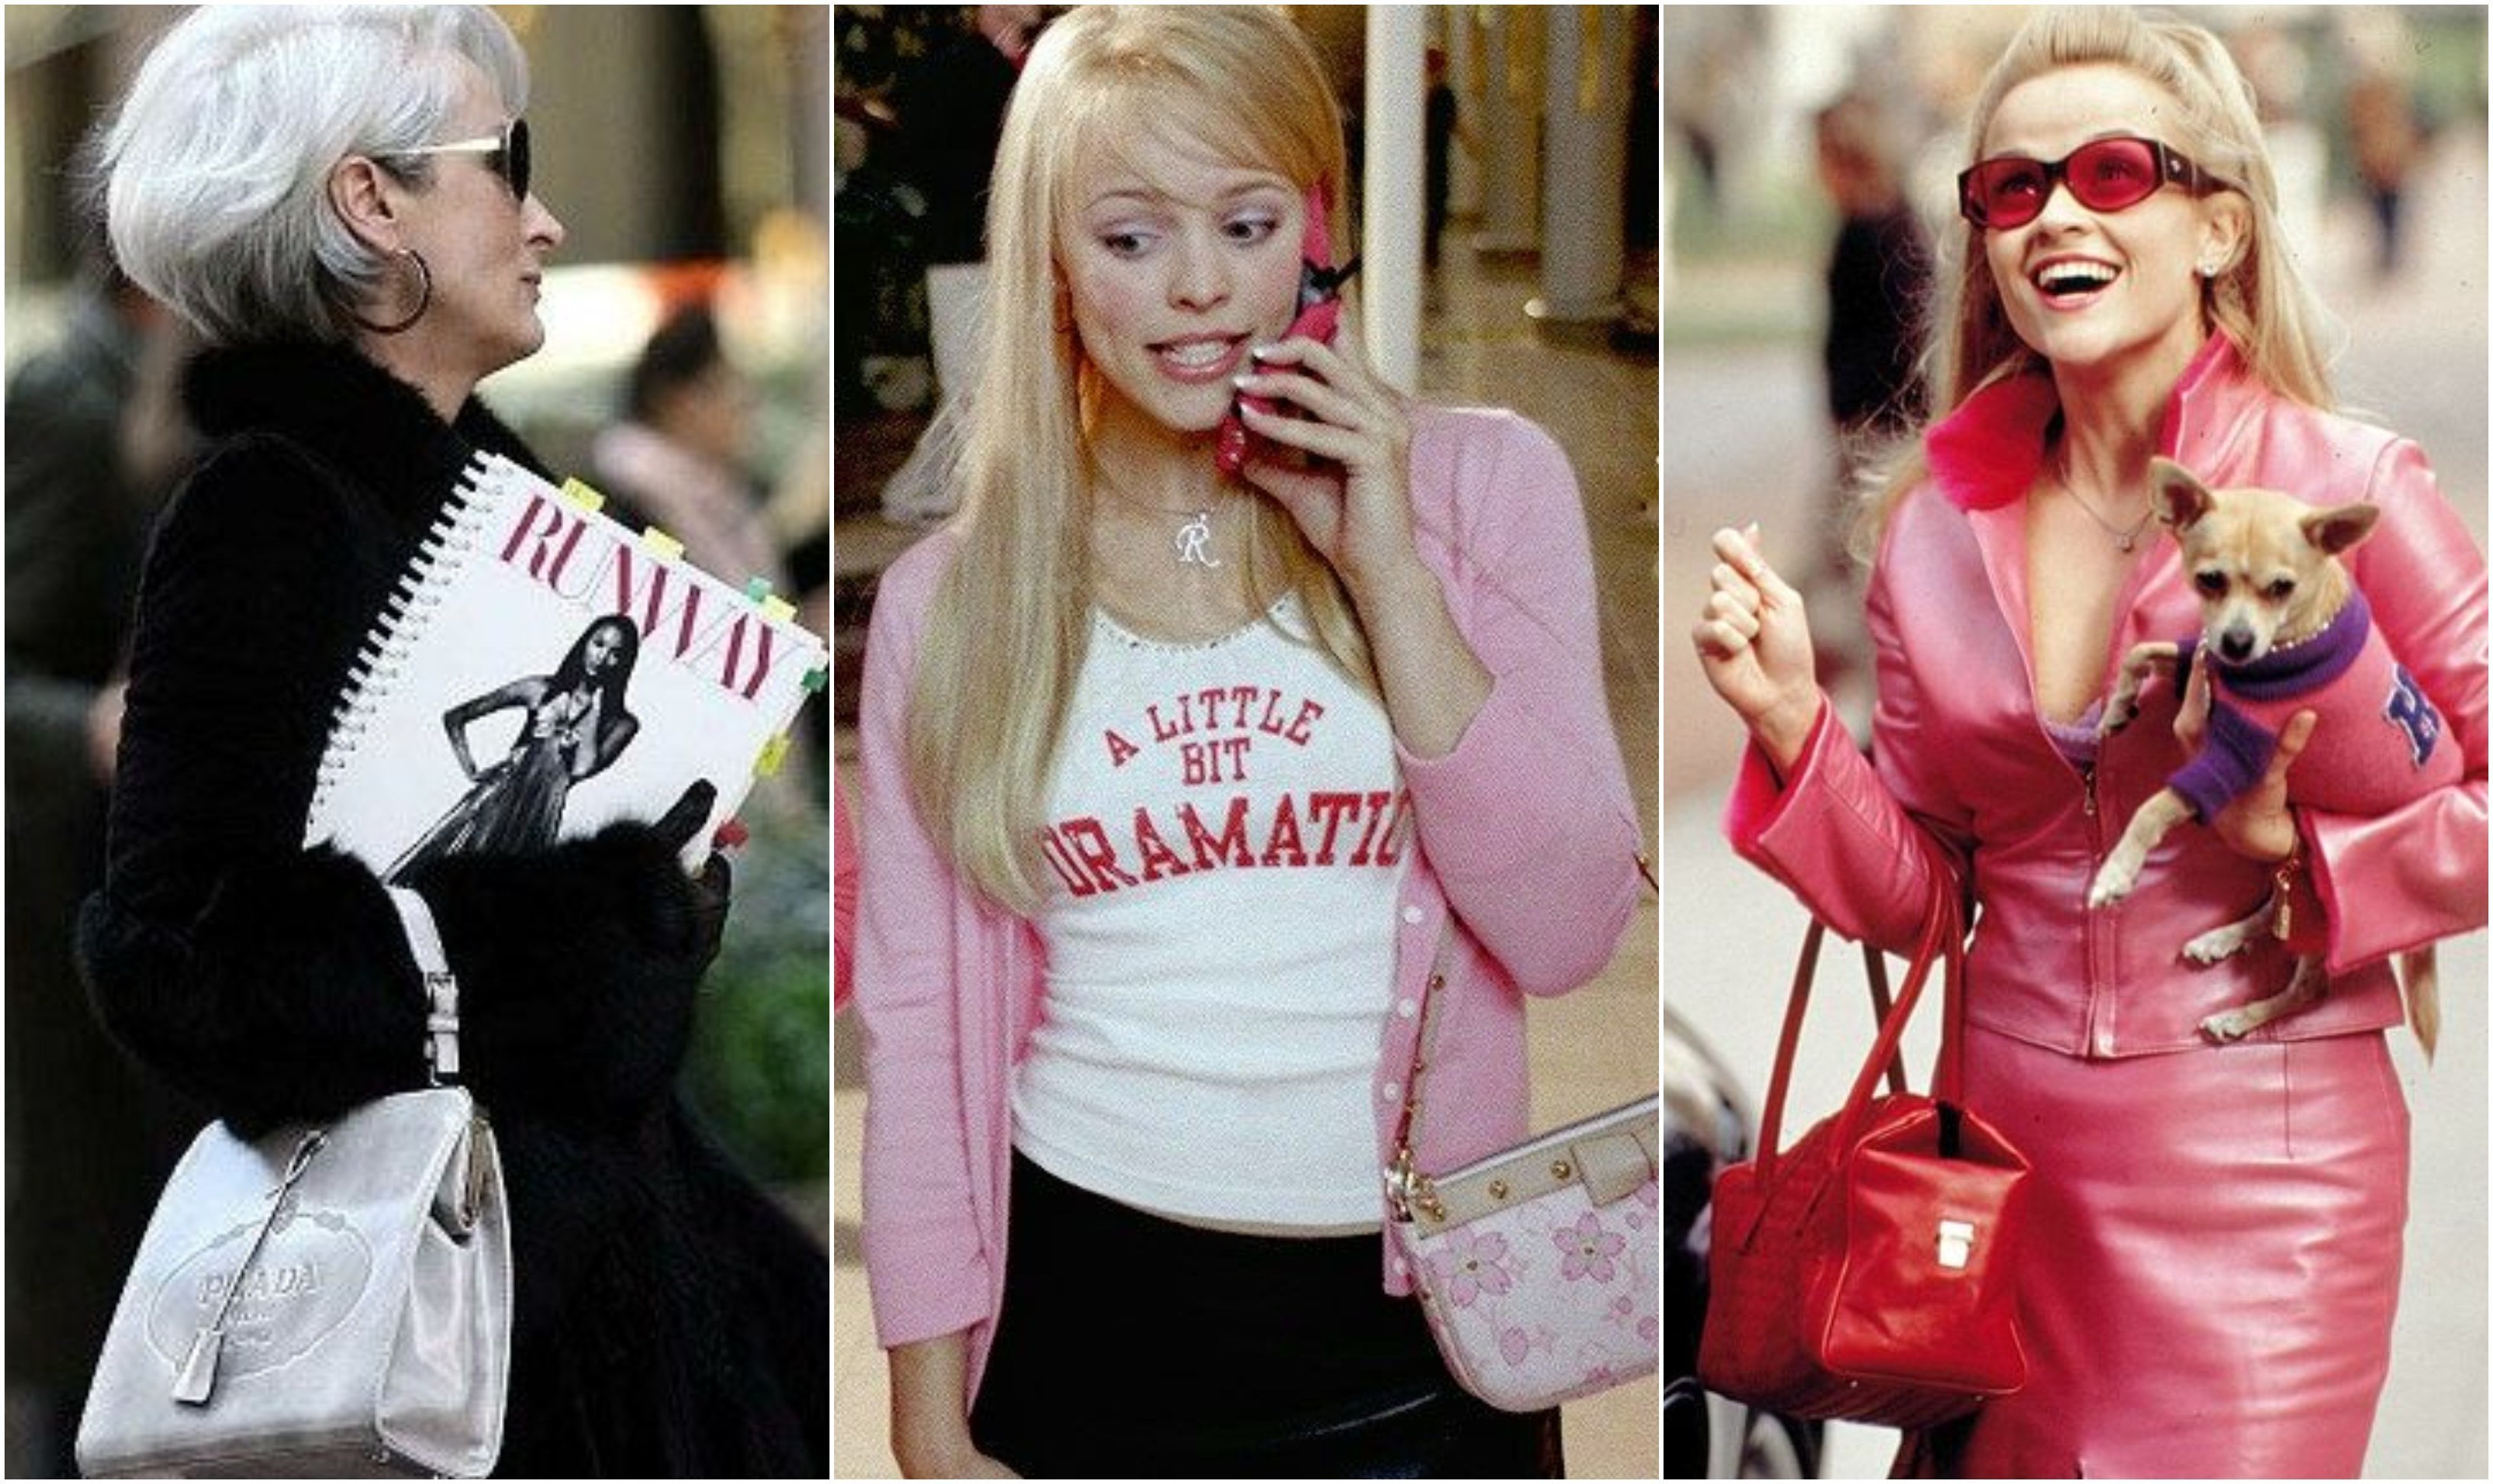 Mery Streep in The Devil Wears Prada, Rachel McAdams in Mean Girls, and Reese Witherspoon in Legally Blonde. Photos: 20th Century Studio, Paramount Pictures, Metro-Goldwyn-Mayer